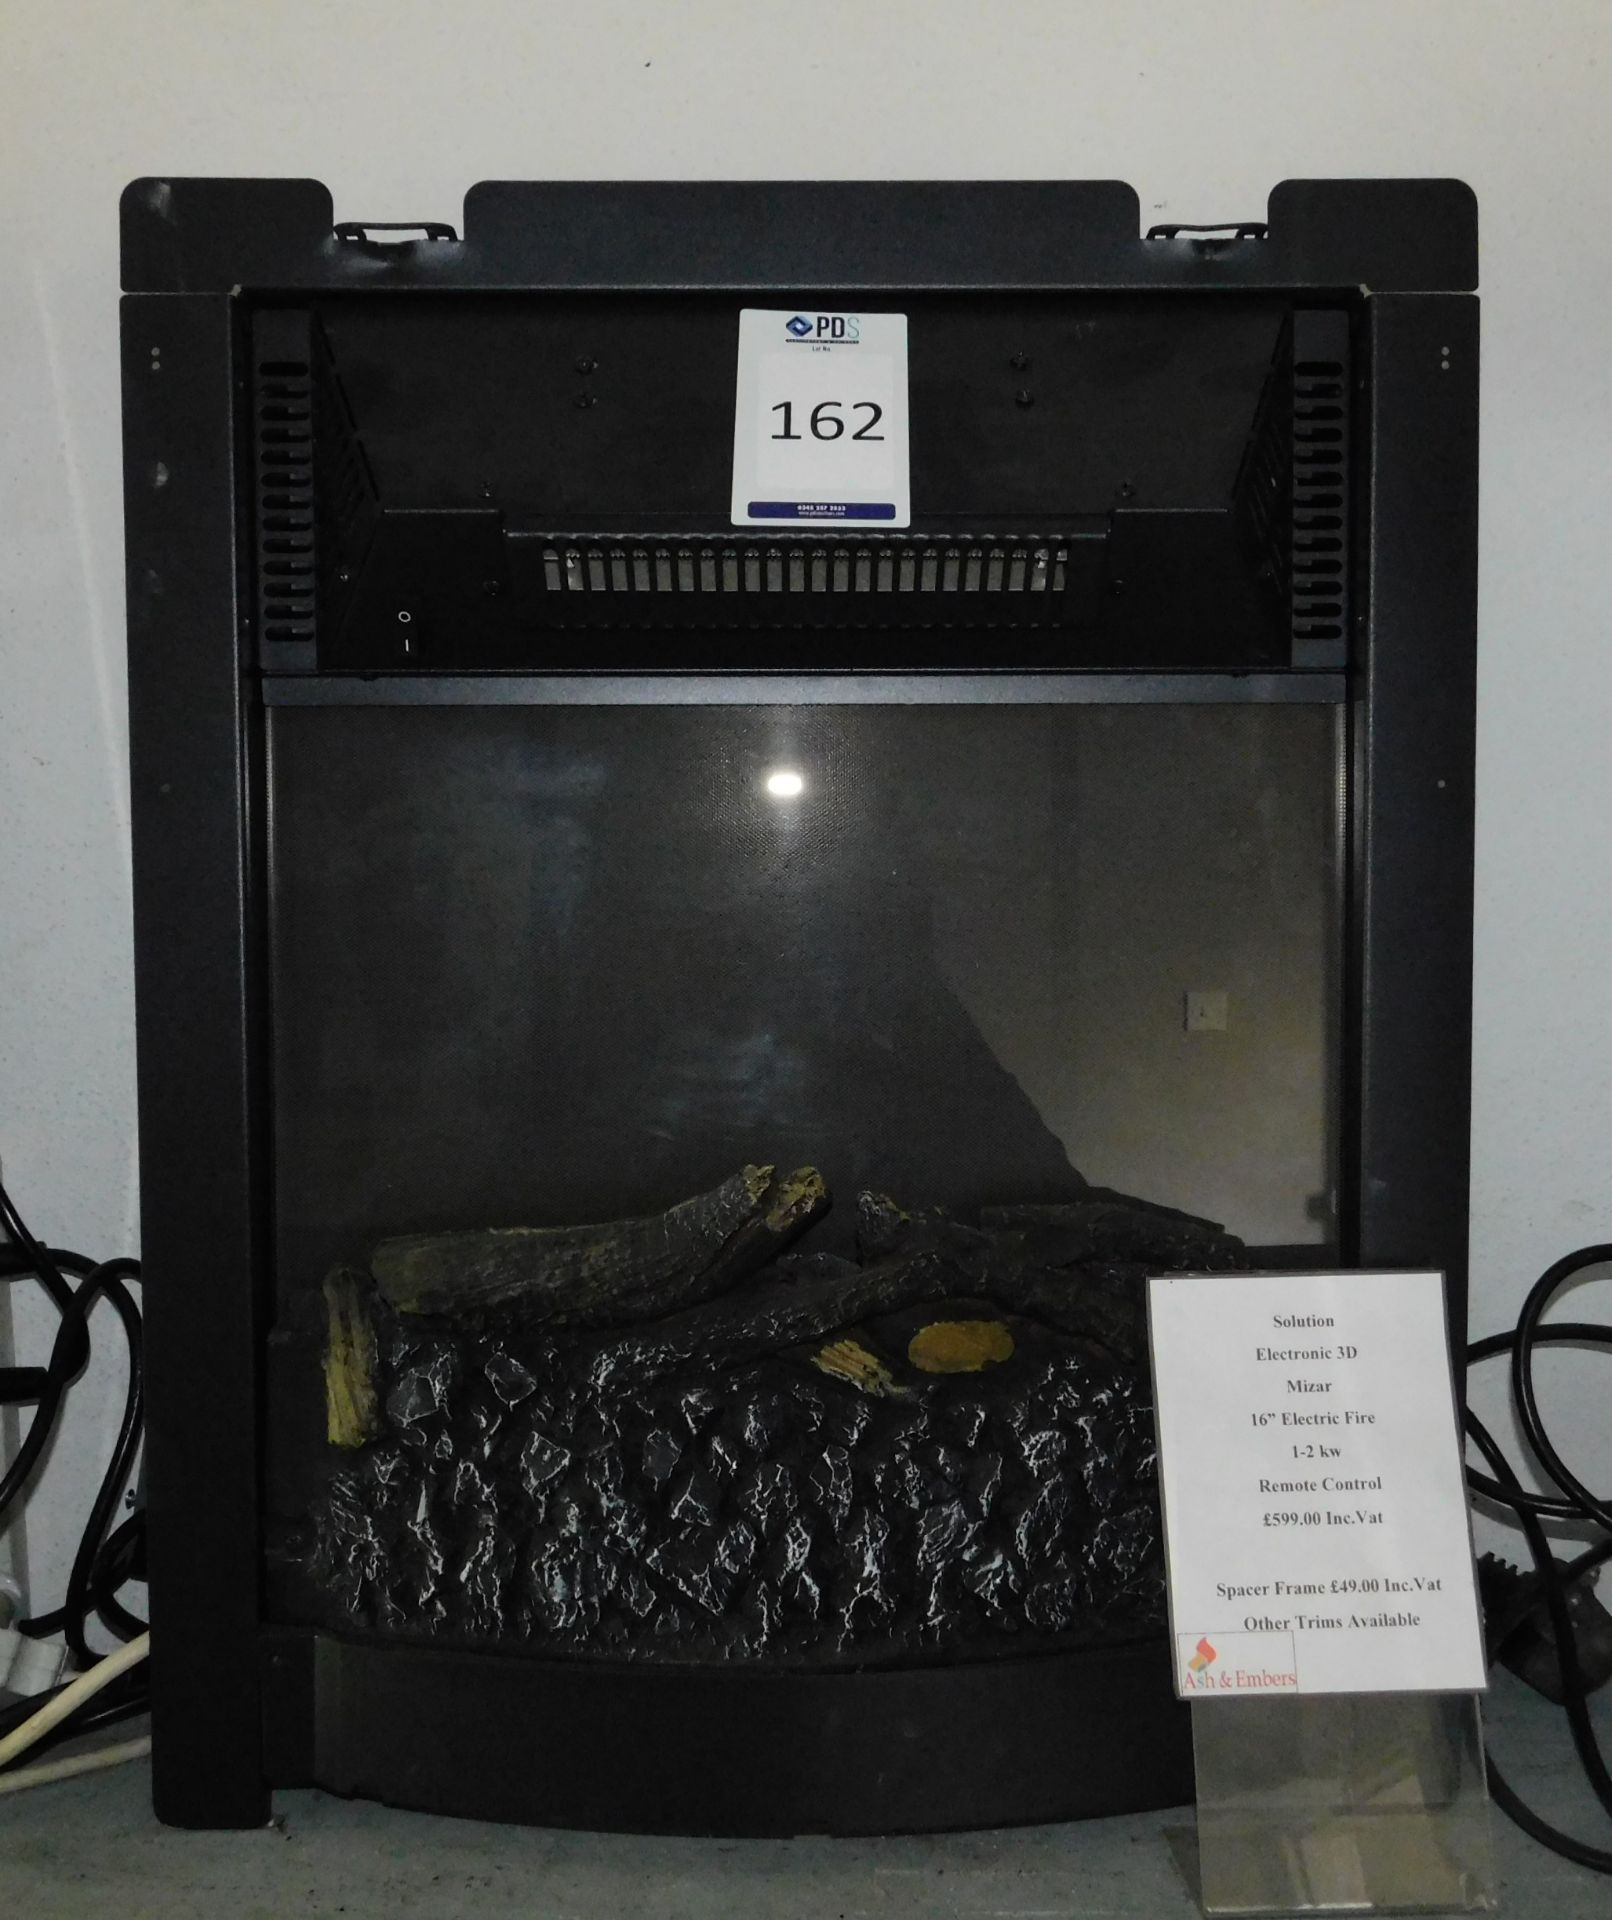 Ex-Display “Solution 3D” 16” 1-2kw Electric Fire with Remote (Where the company’s description/